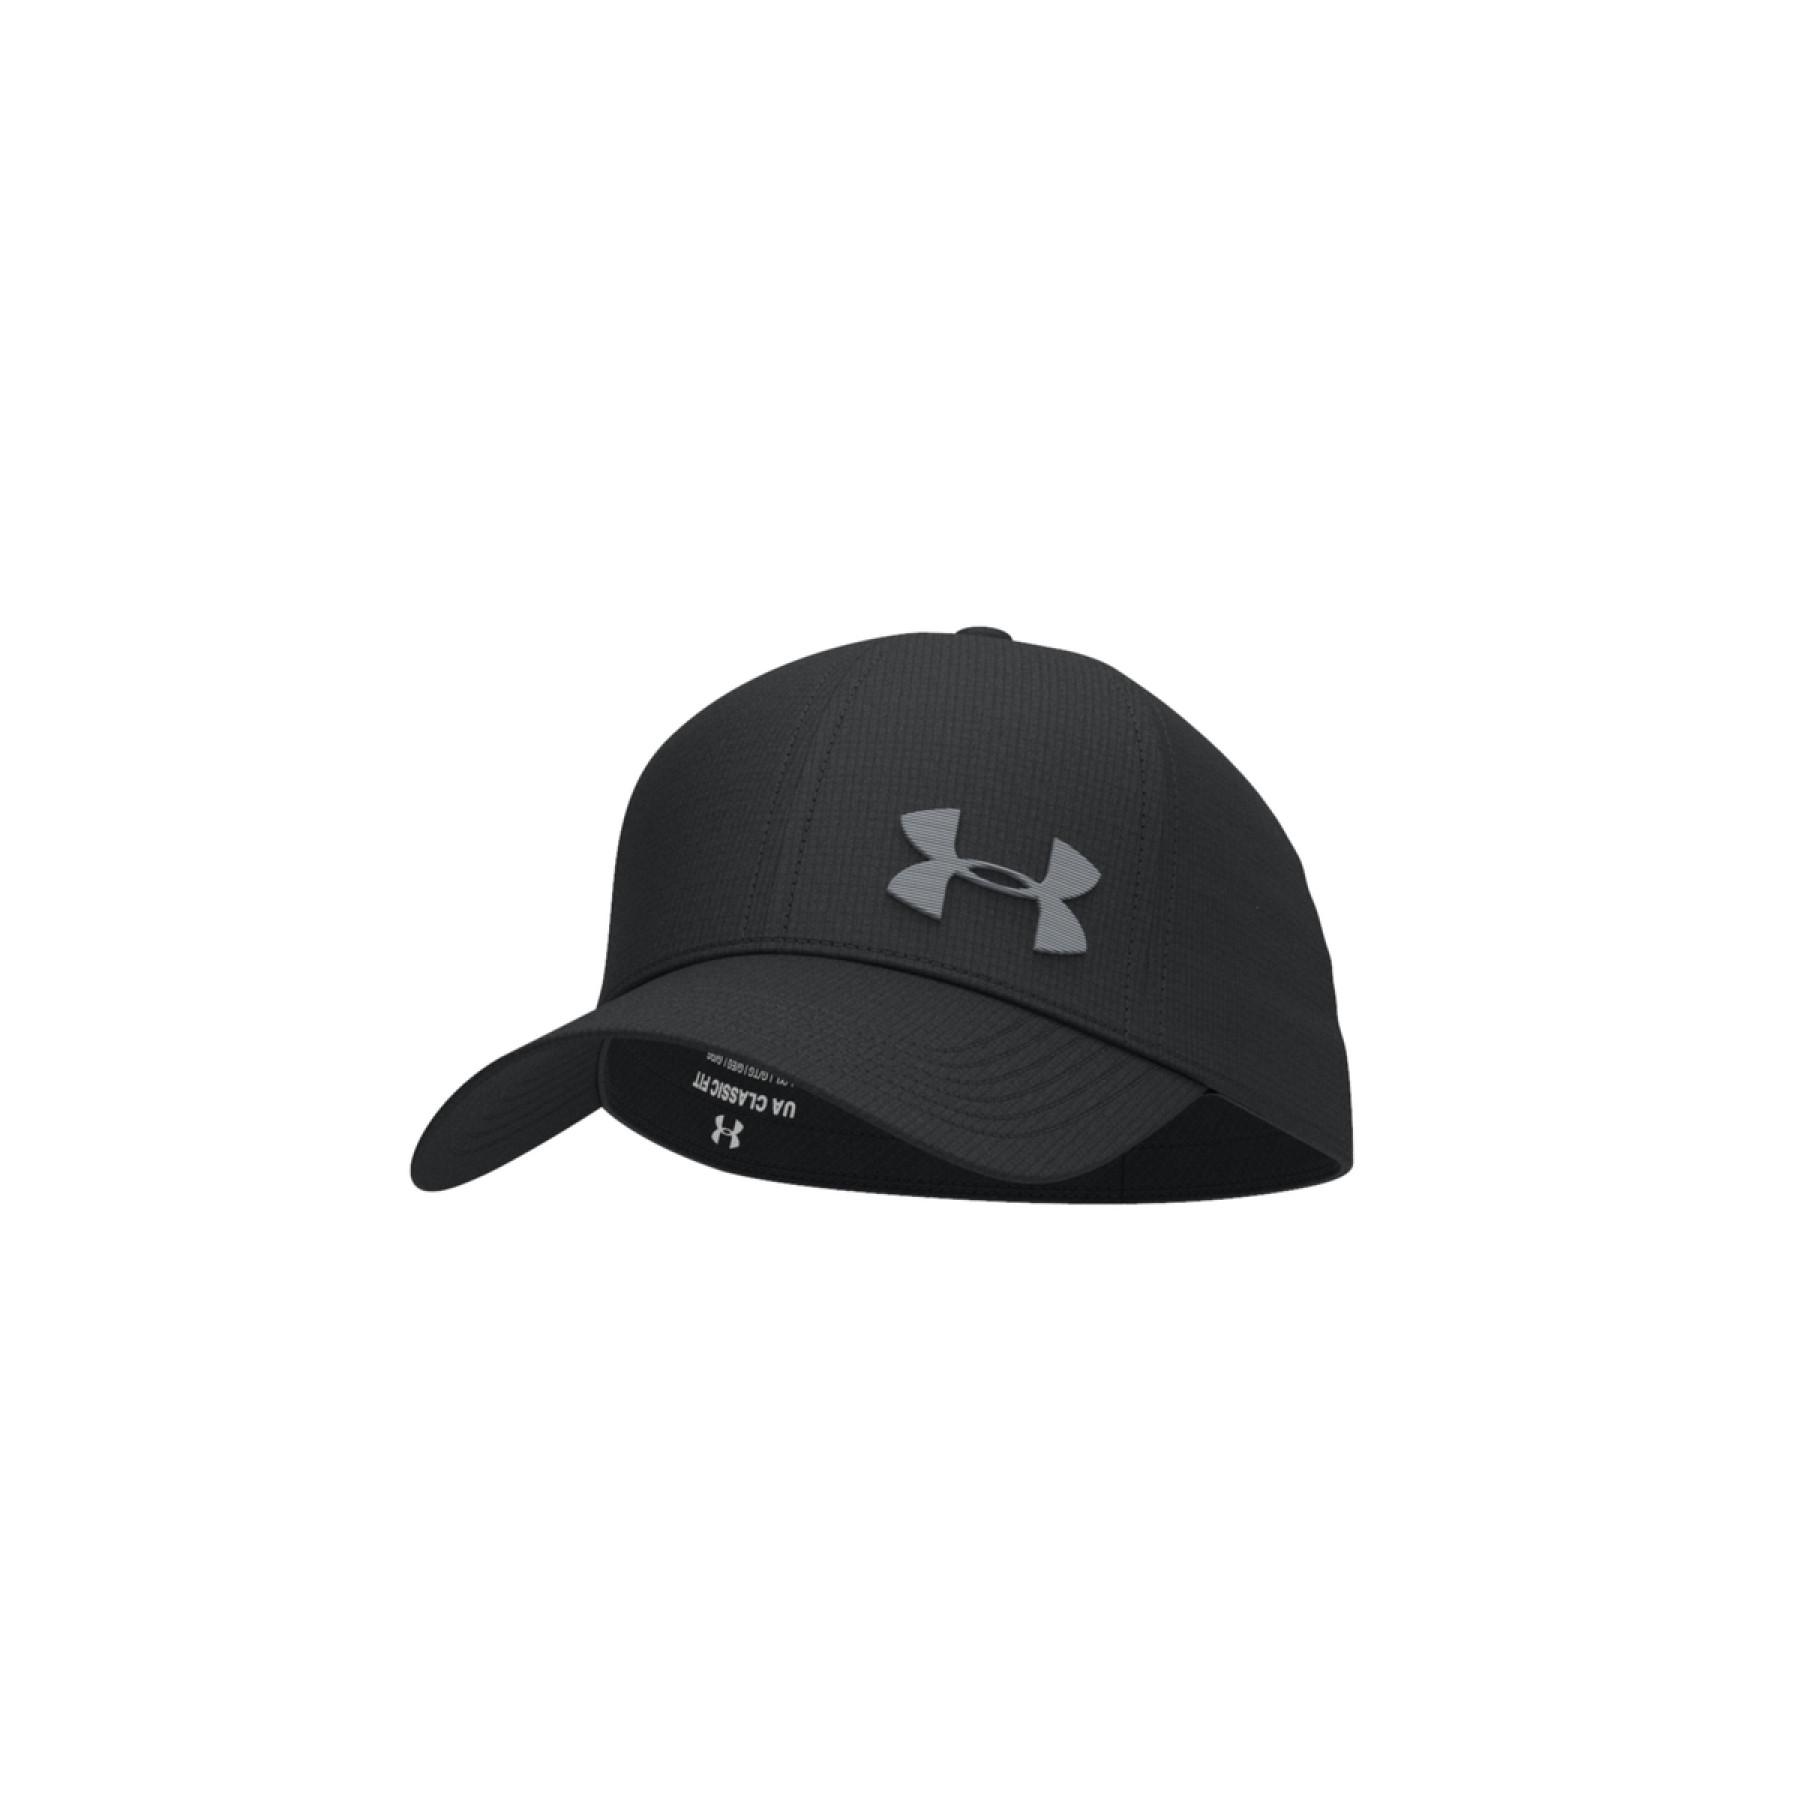 Kappe Under Armour extensible ArmourVent